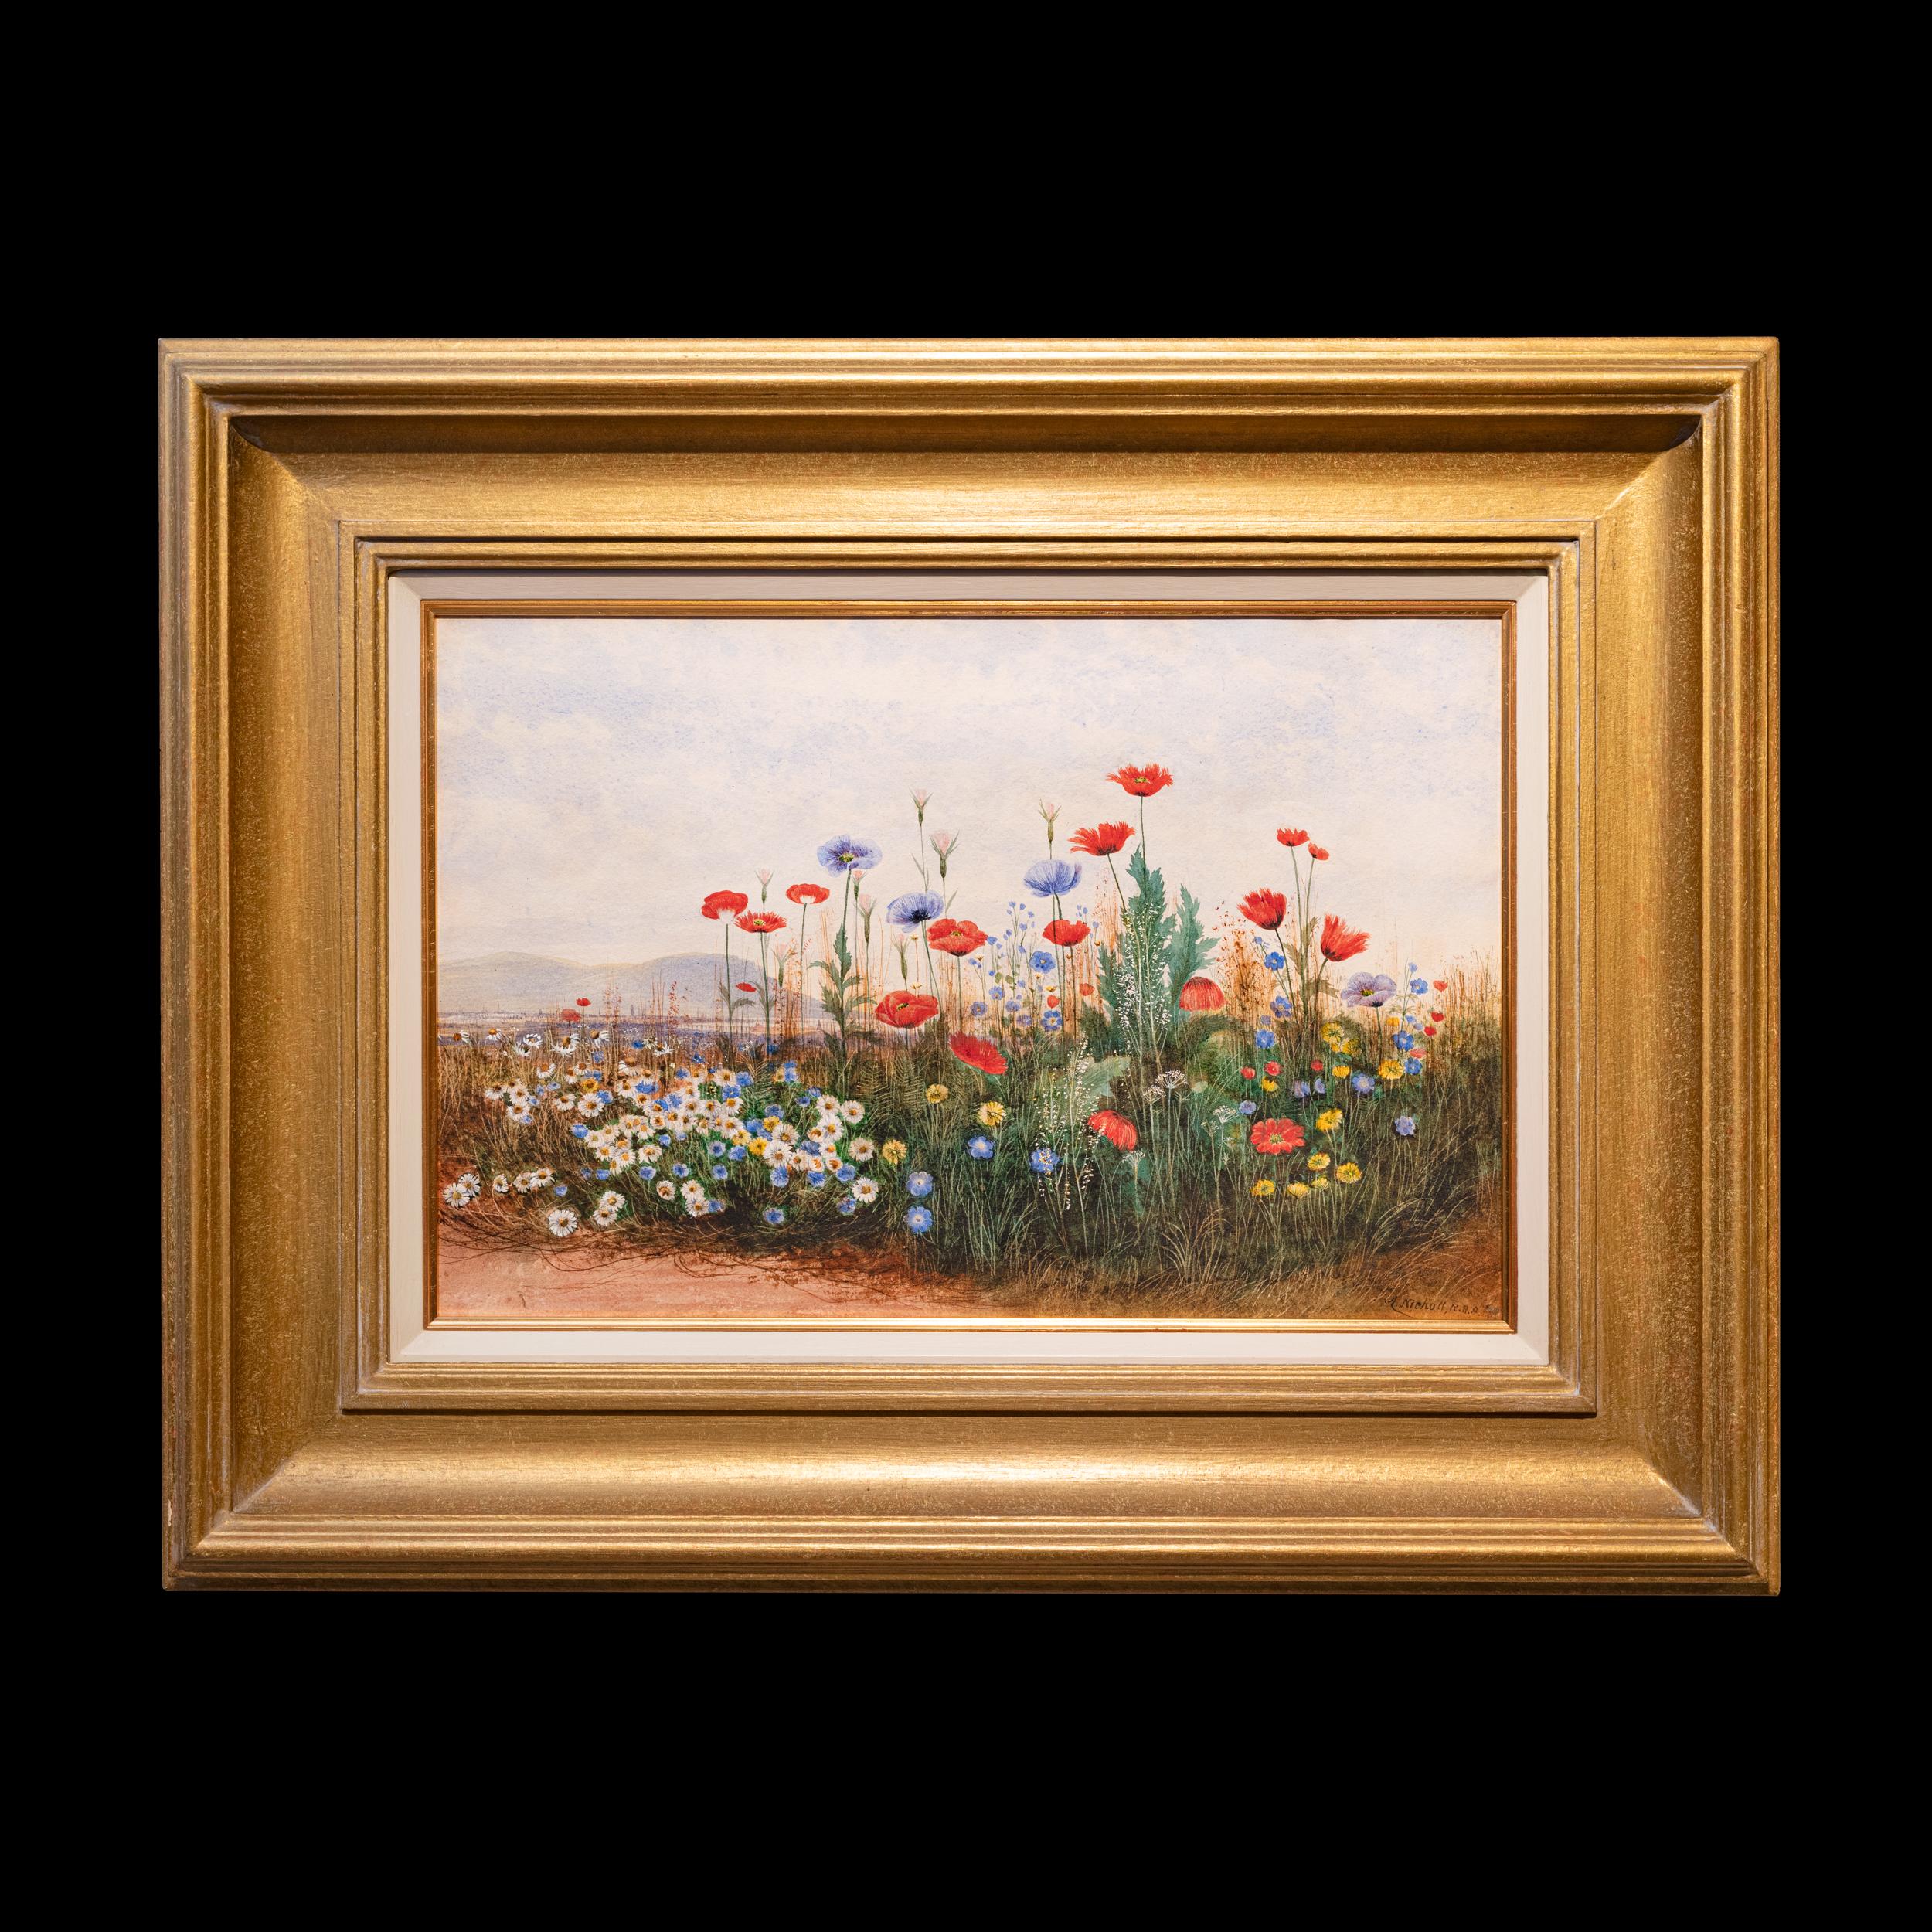 Artist: Andrew Nicholl R.H.A. (1804-1886)

Bank Of Wild Flowers, Poppies And Daisies

Canvas Size: H: 14 in / 35.6 cm ; W: 21 in / 53.3 cm

Framed Size: H: 24 in / 61 cm ; W: 30 3/4 in / 78.2

Medium: Watercolour

Signed: Lower Left: A. Nicholl,